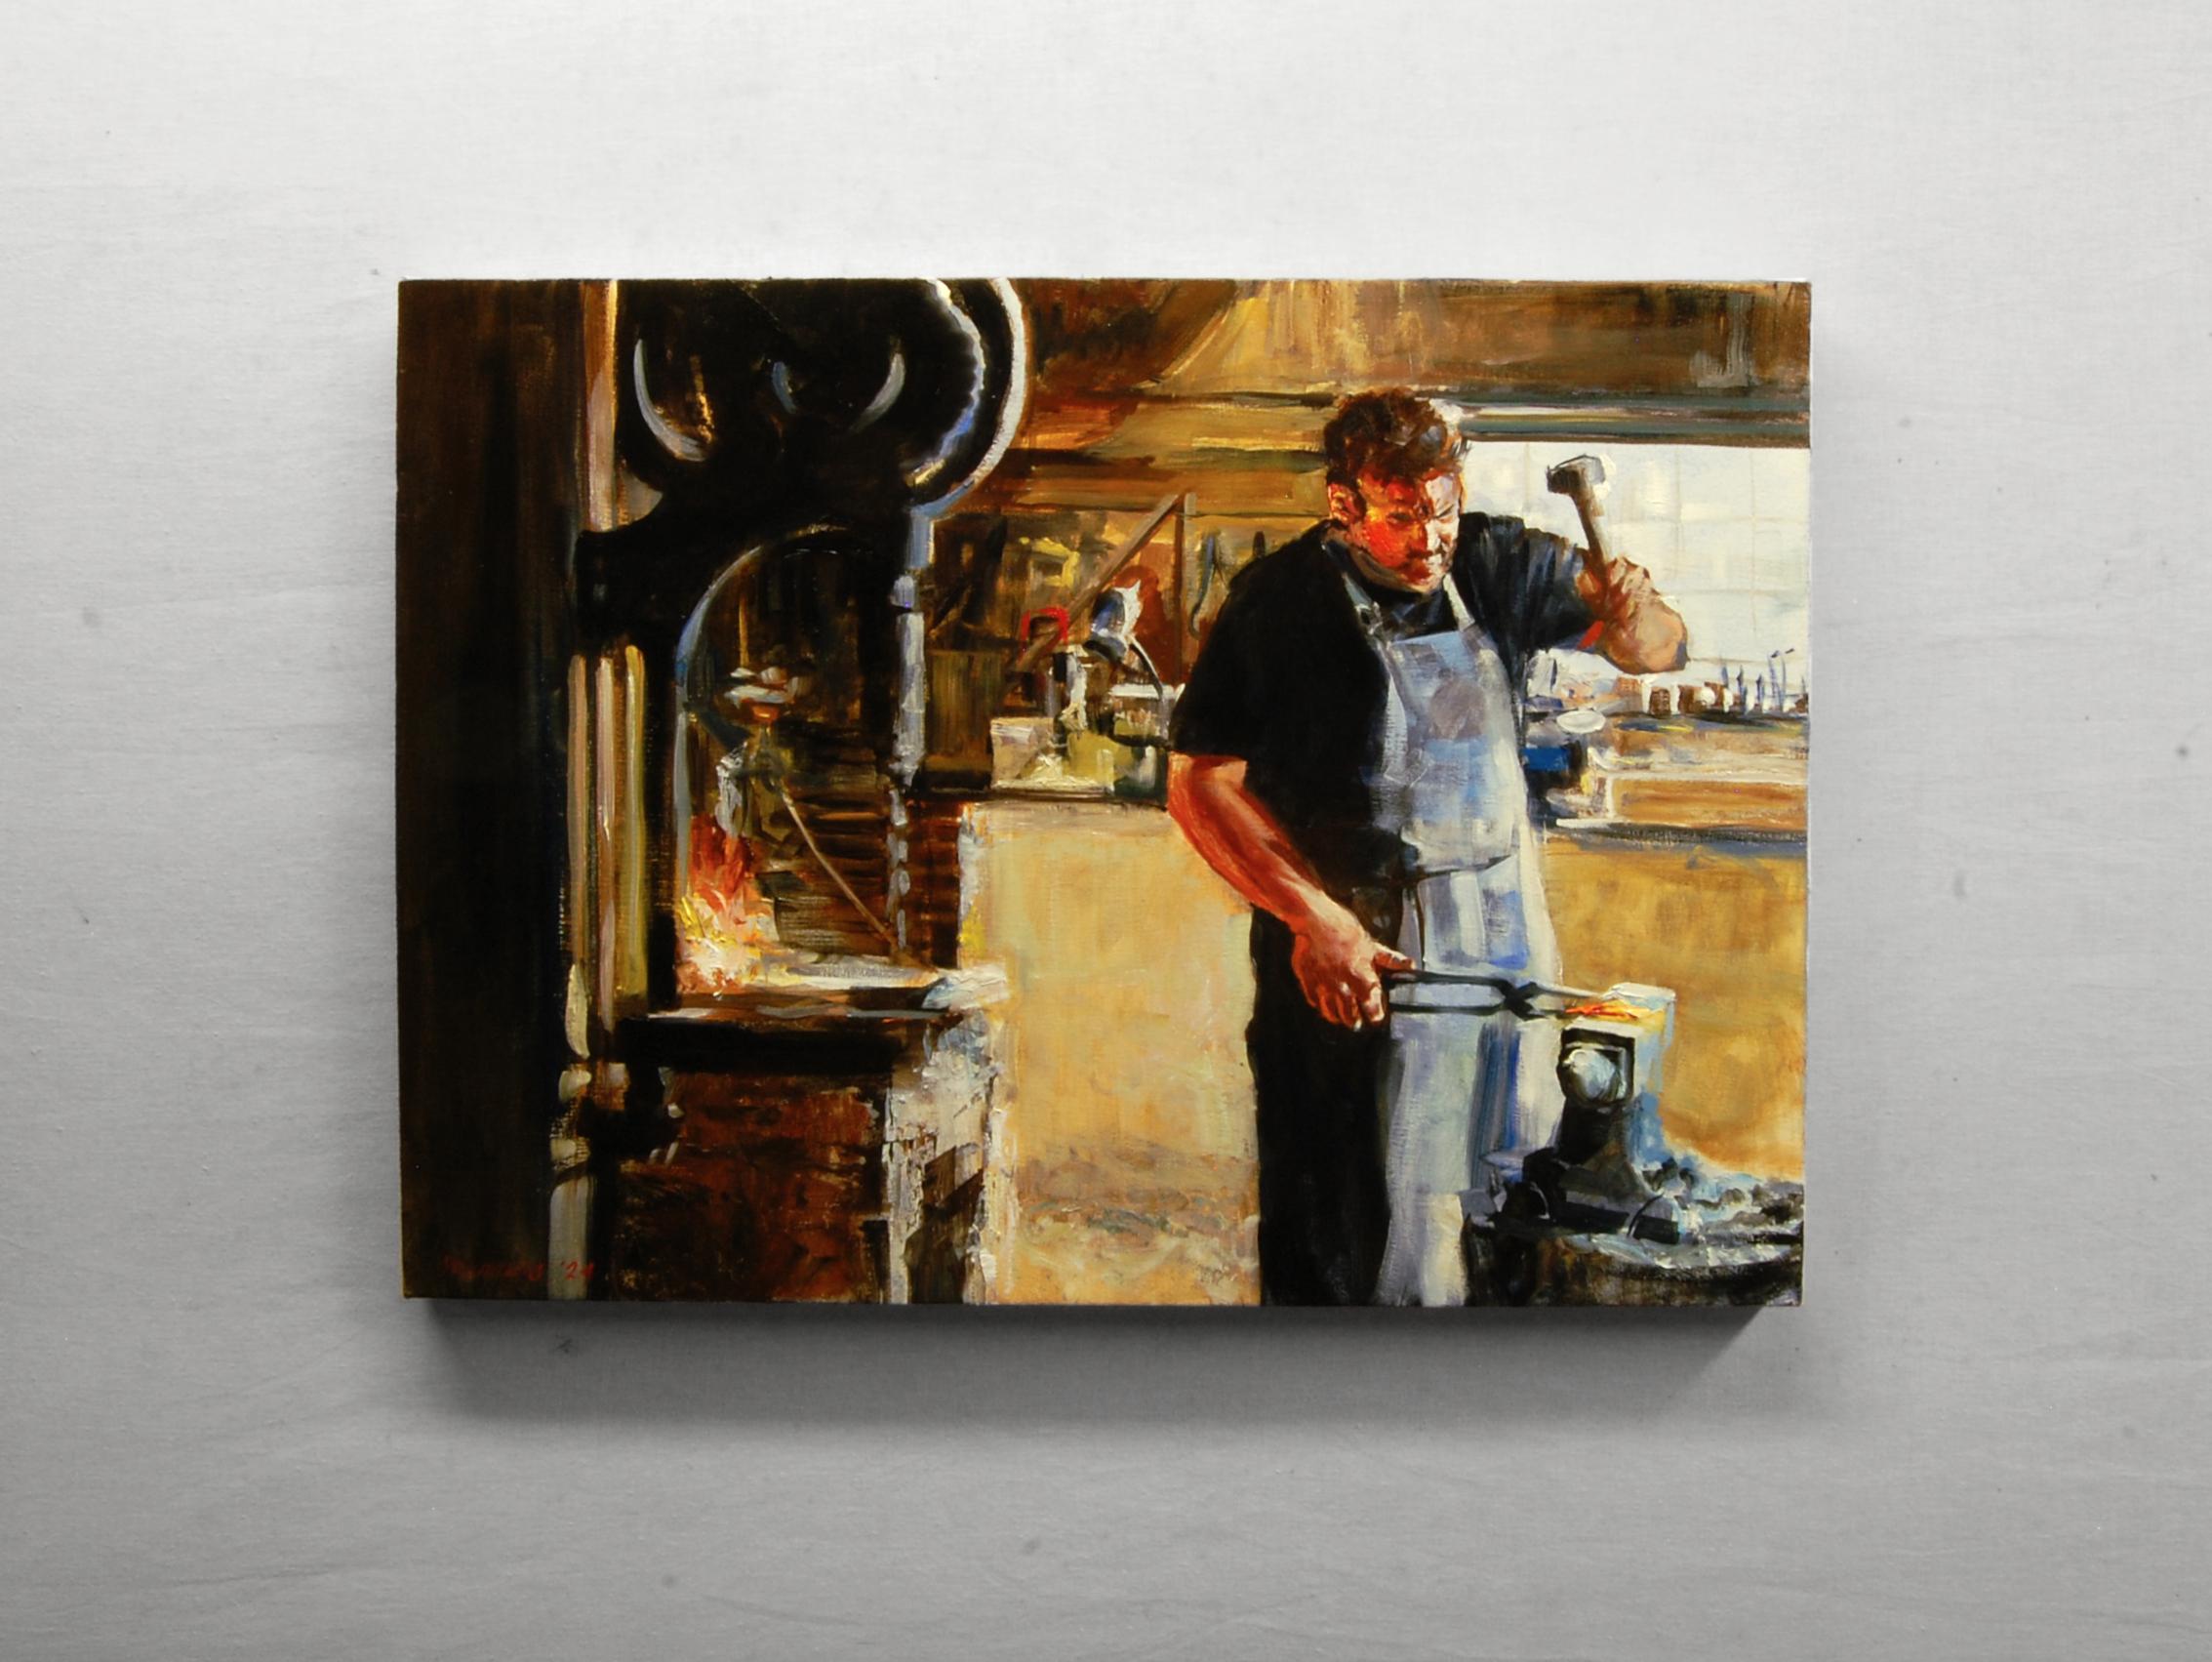 <p>Artist Comments<br>This impressionist painting is part of a series by artist Onelio Marrero, exploring craftsmen at work in their environments. Within this interior scene, Onelio depicts a blacksmith in his workshop. The piece shows his